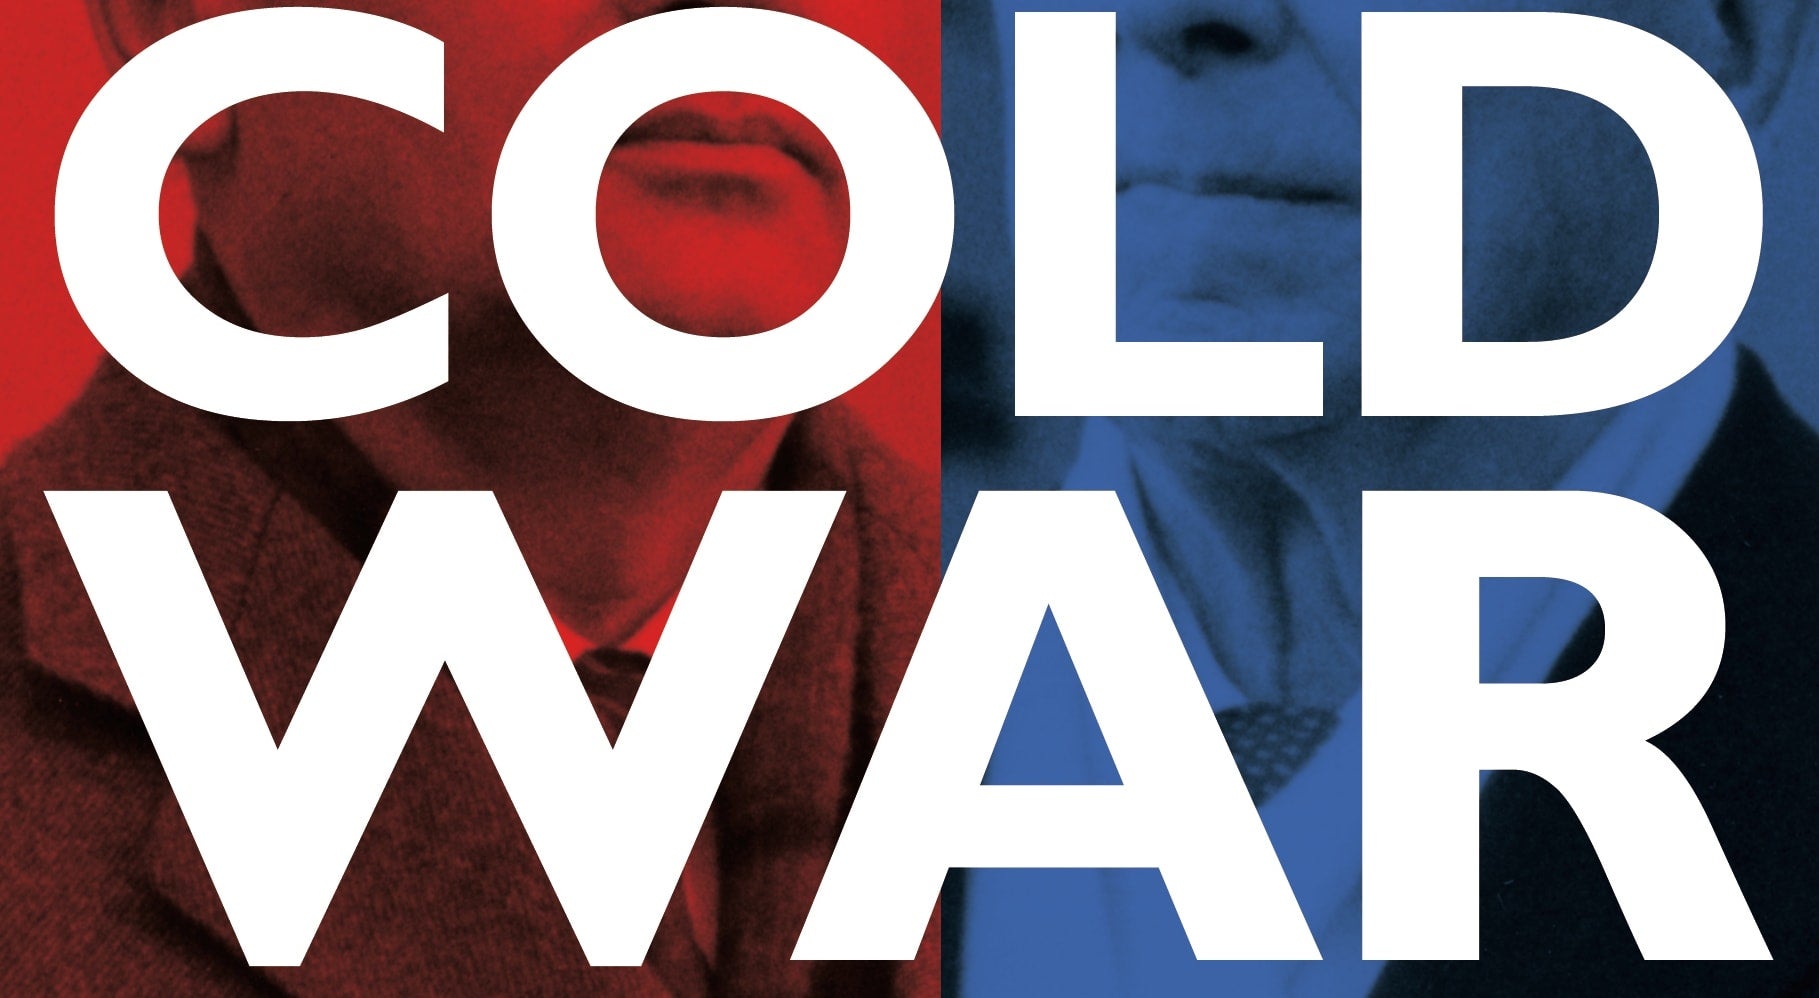 Cold War written on blue and red background